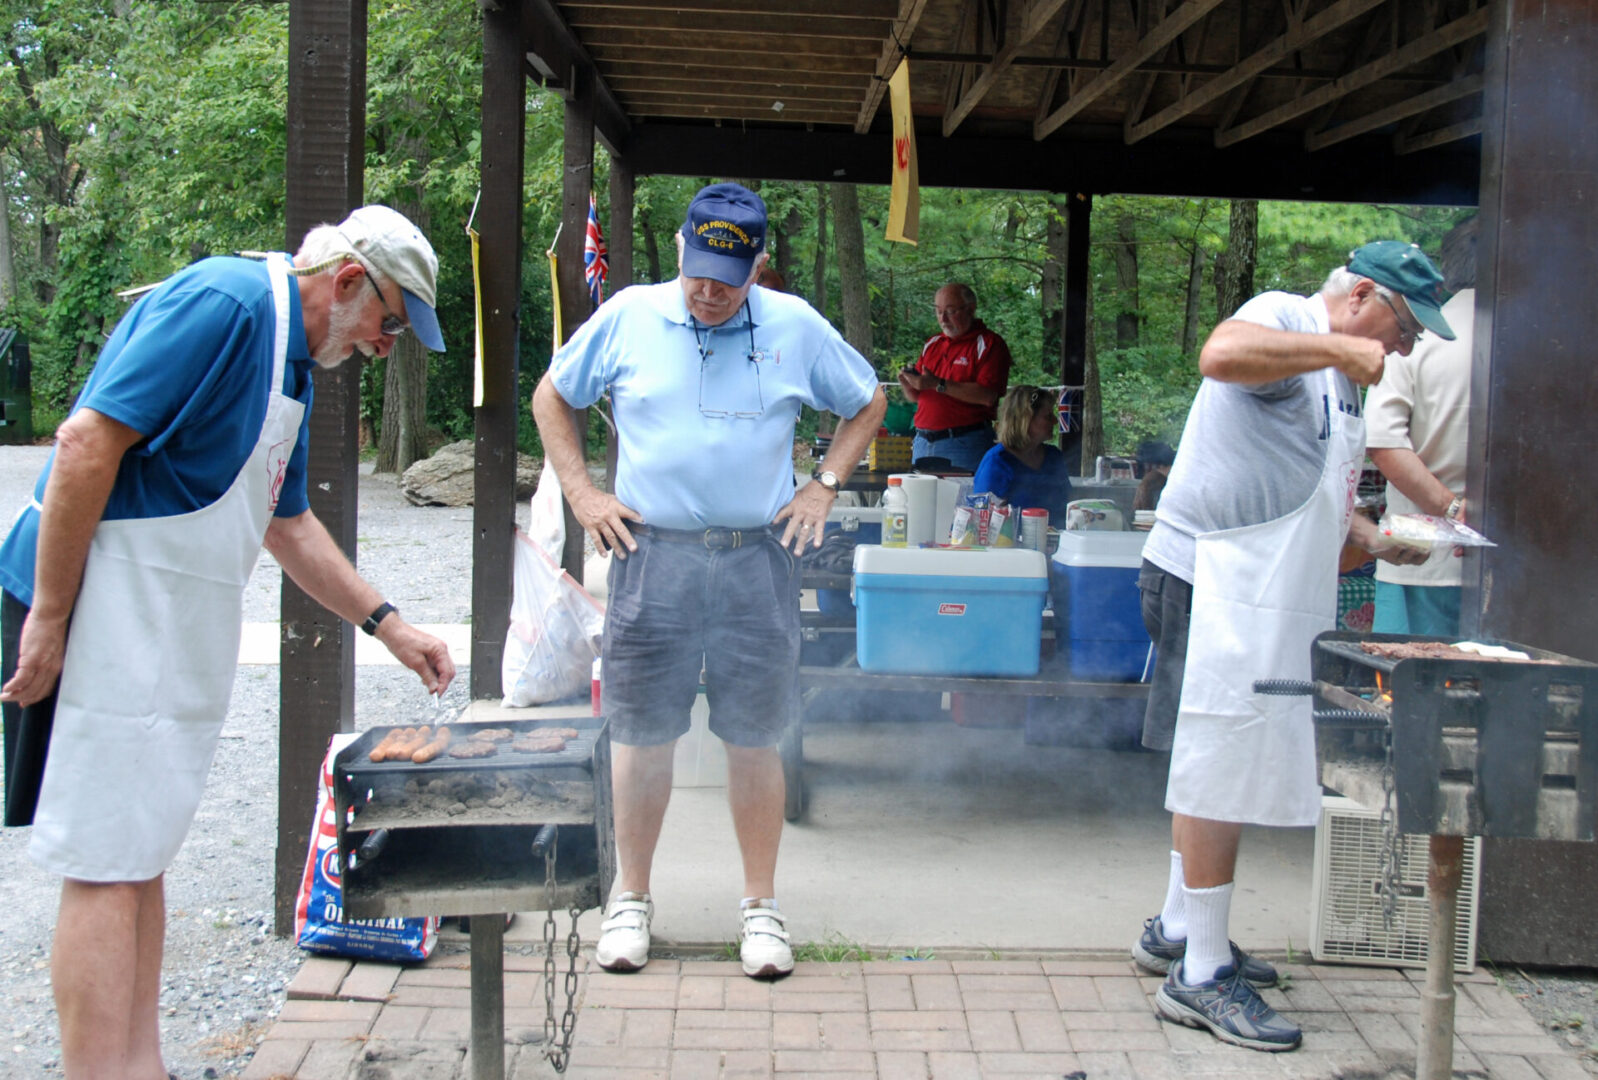 A group of men standing around a grill.